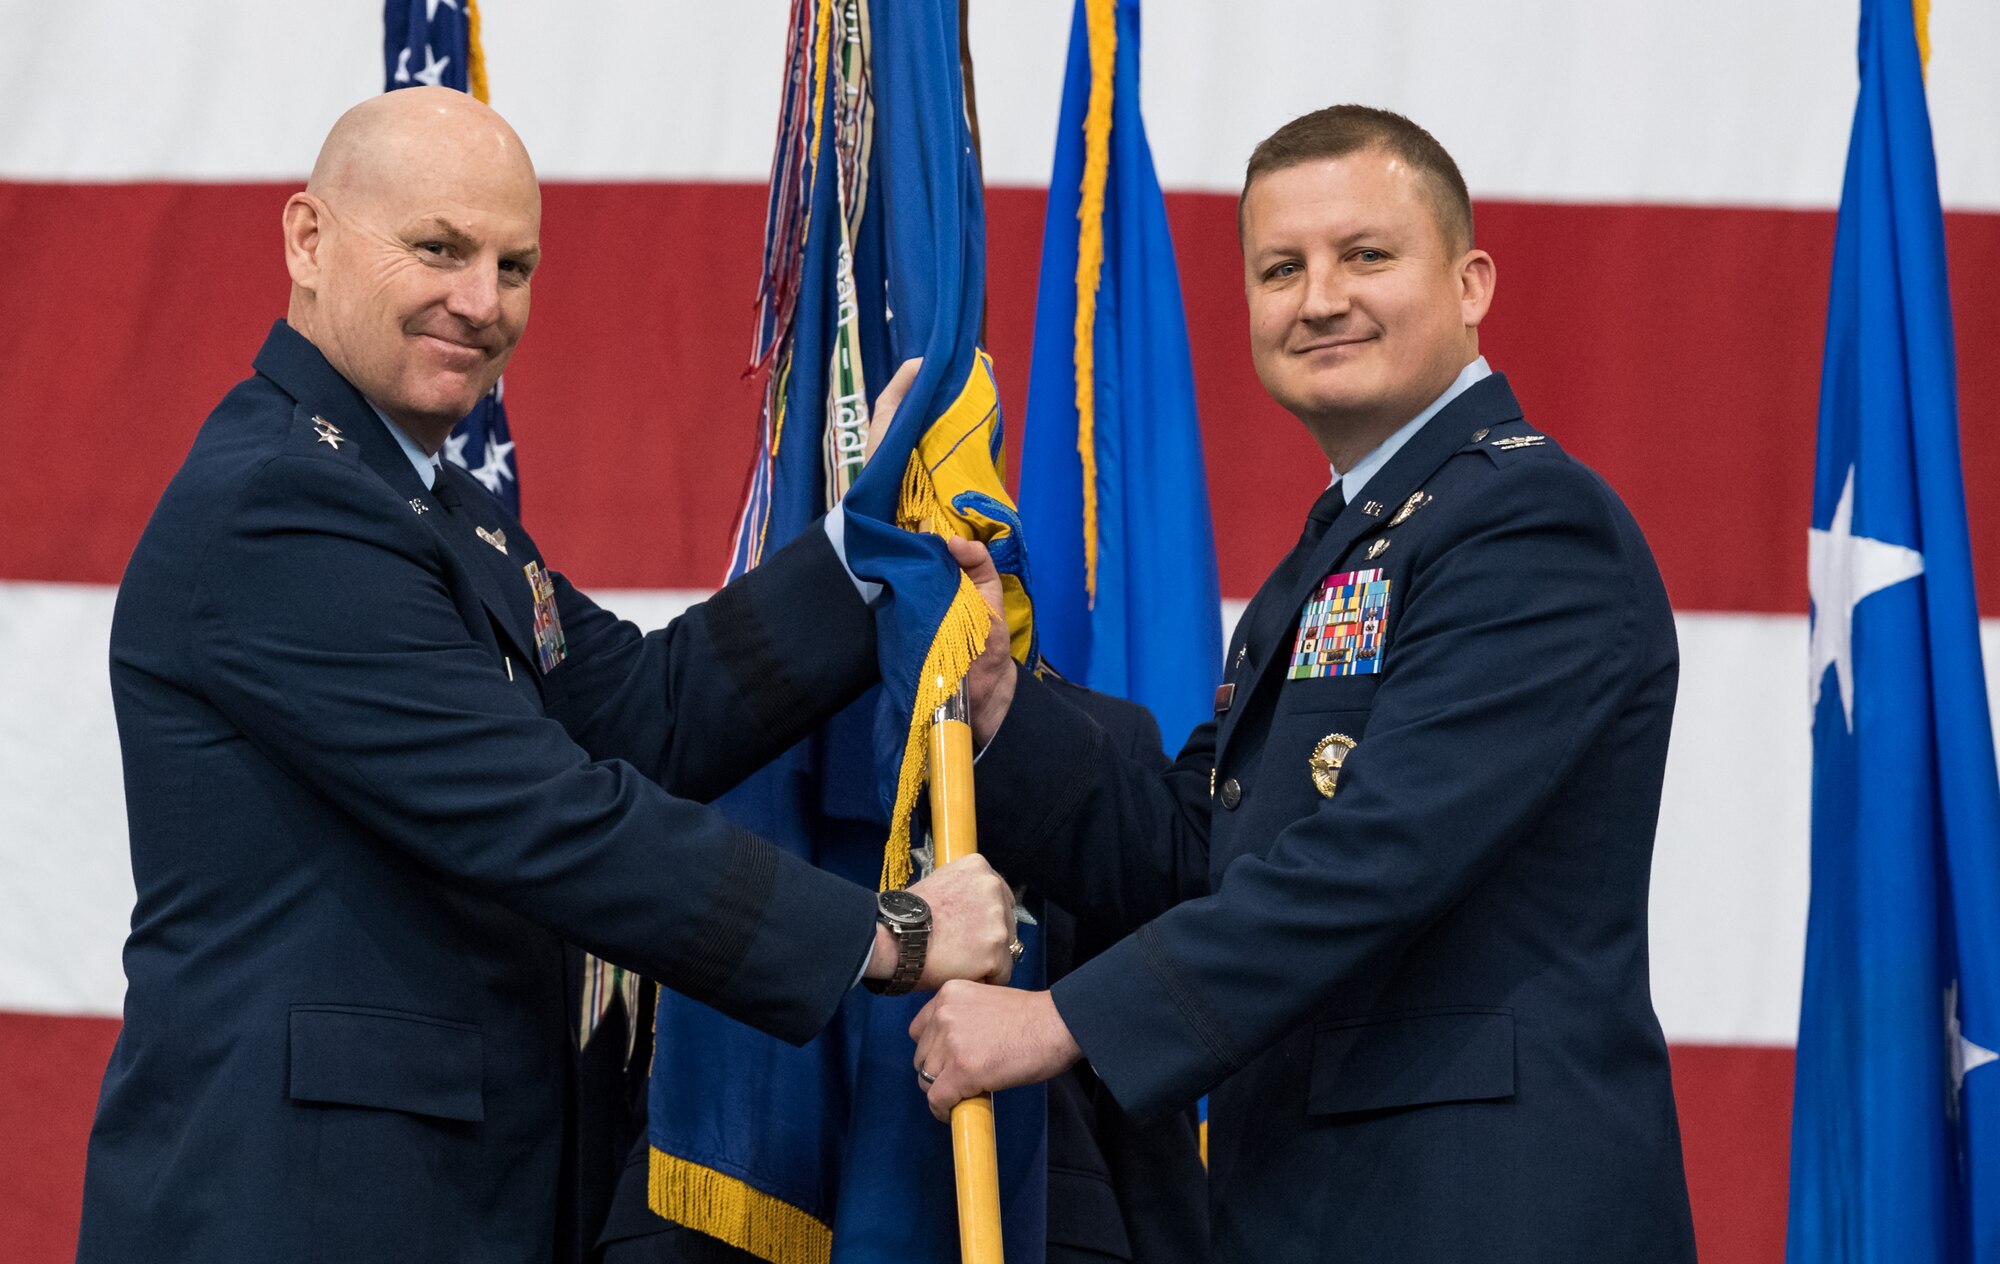 Maj. Gen. Sam C. Barrett, left, 18th Air Force commander, presents the 436th Airlift Wing guidon to Col. Matthew Jones, incoming 436th AW commander, during a change of command ceremony Jan. 7, 2020, inside the 436th Aerial Port Squadron, on Dover Air Force Base, Del. Upon taking command, Jones became the wing’s 35th commander. (U.S. Air Force photo by Roland Balik)